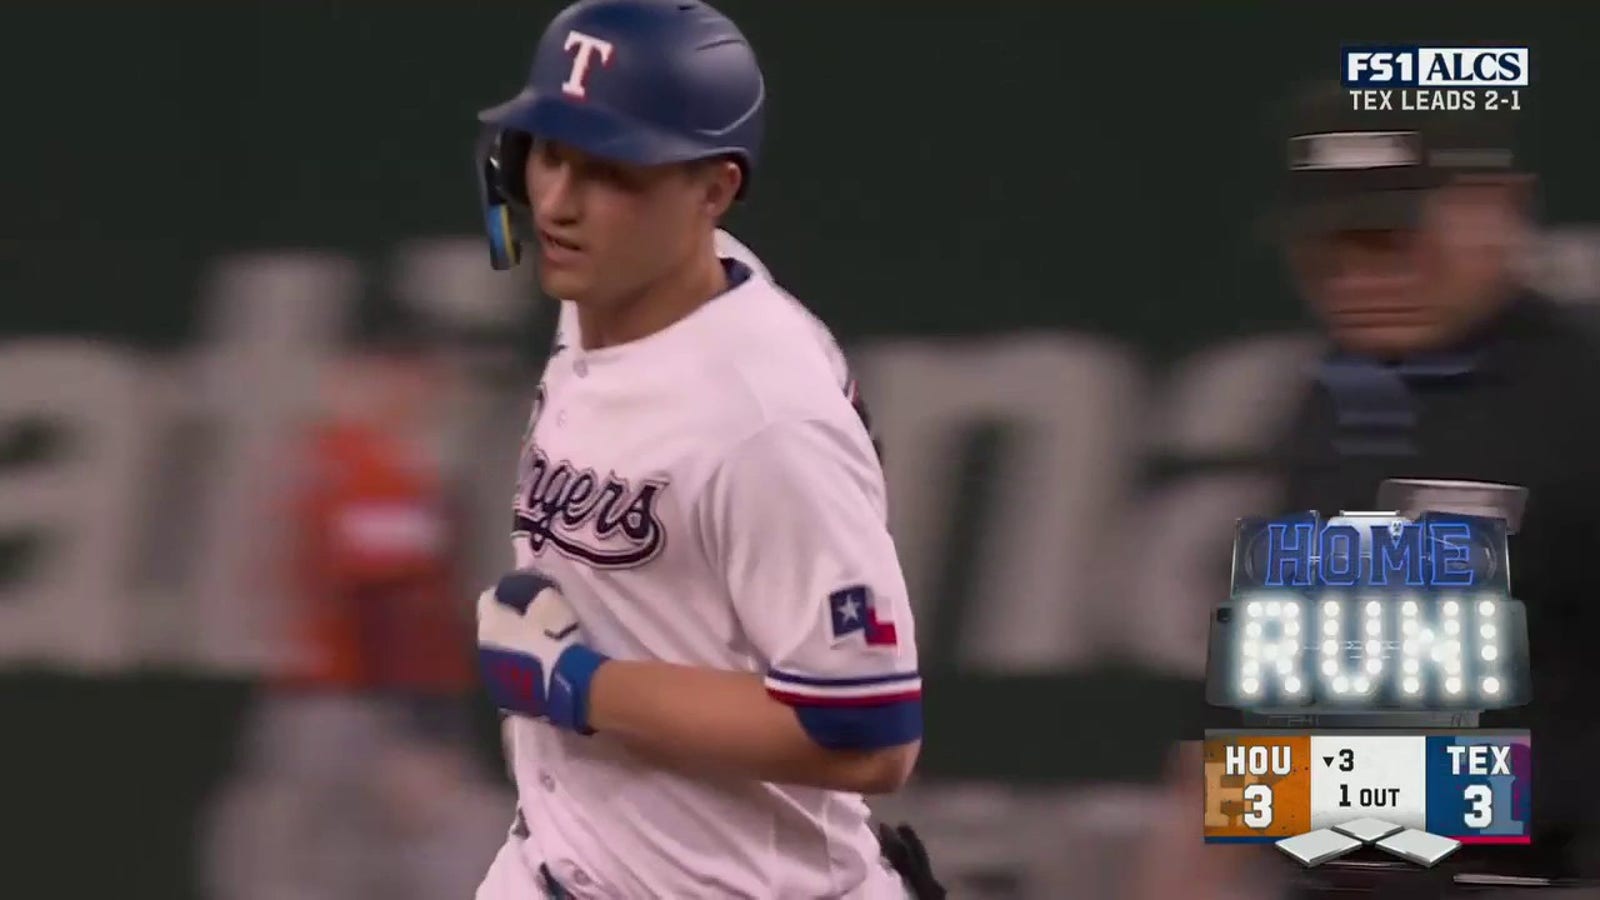 Rangers' Corey Seager crushes solo home run to tie game vs. Astros